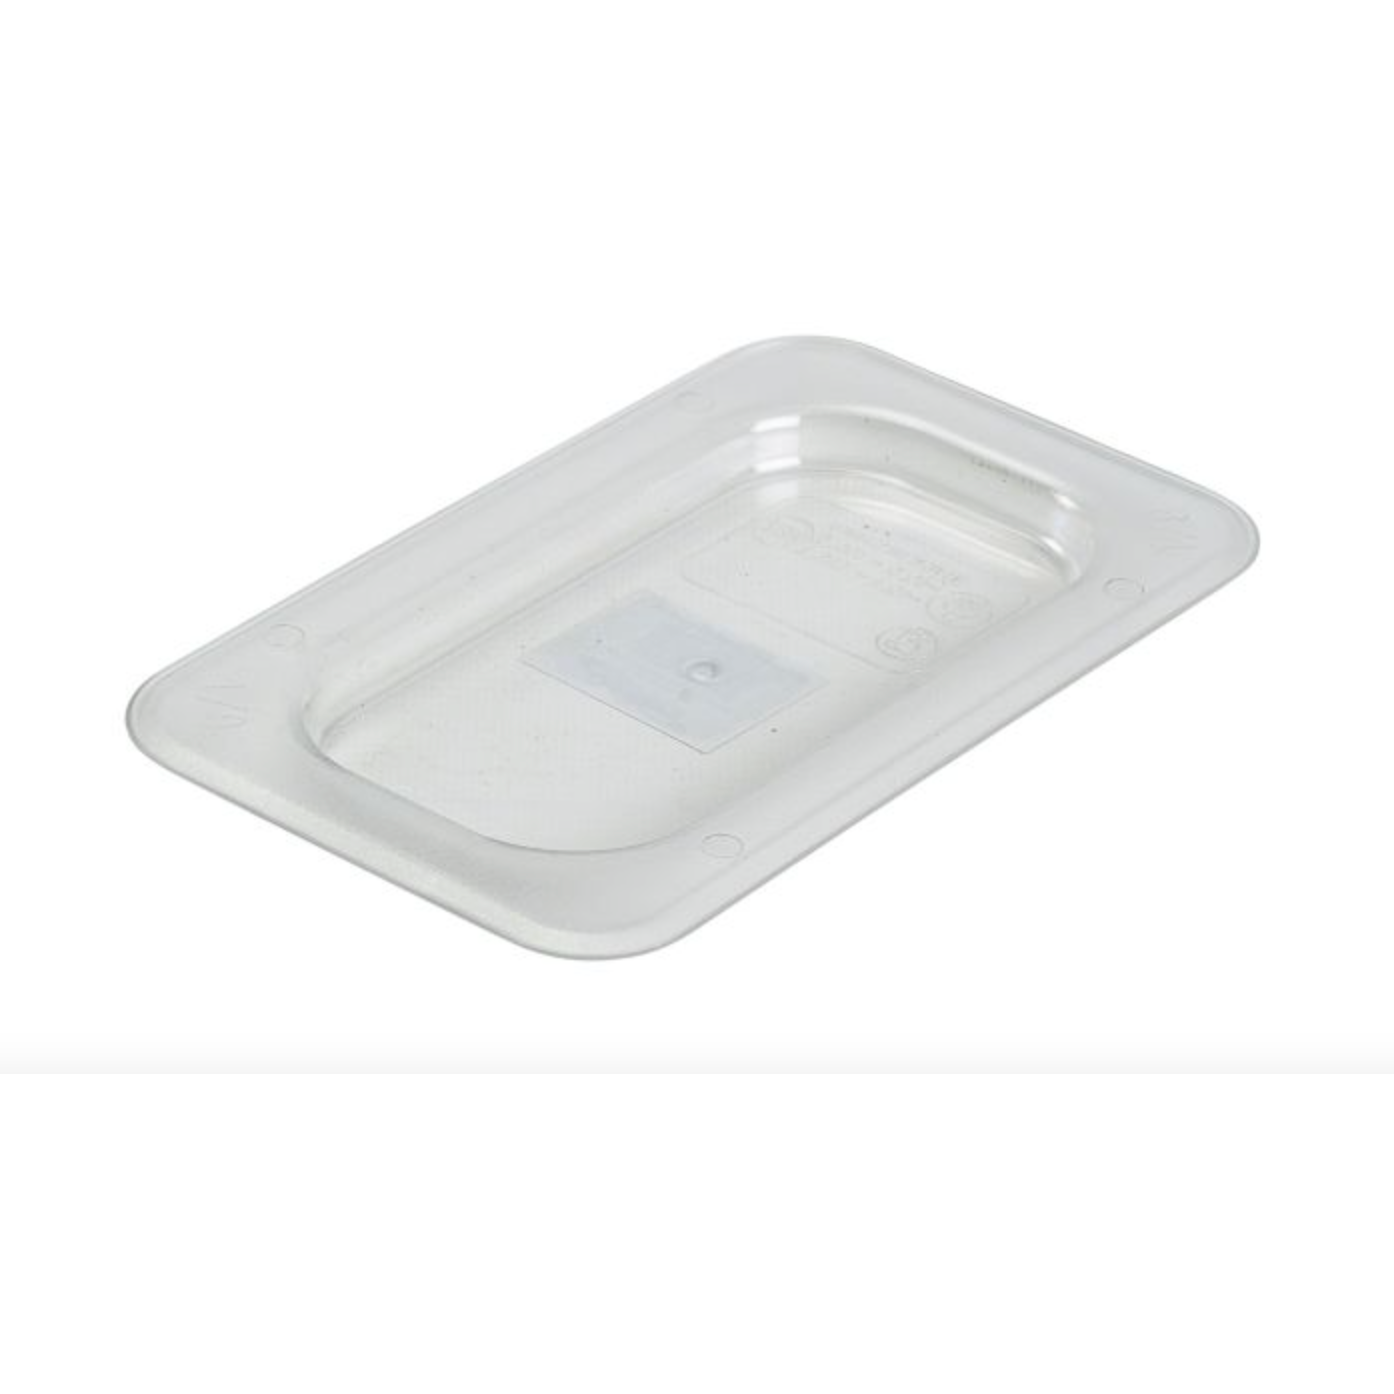 GenWare 1/9 - Polycarbonate GN Lid Clear